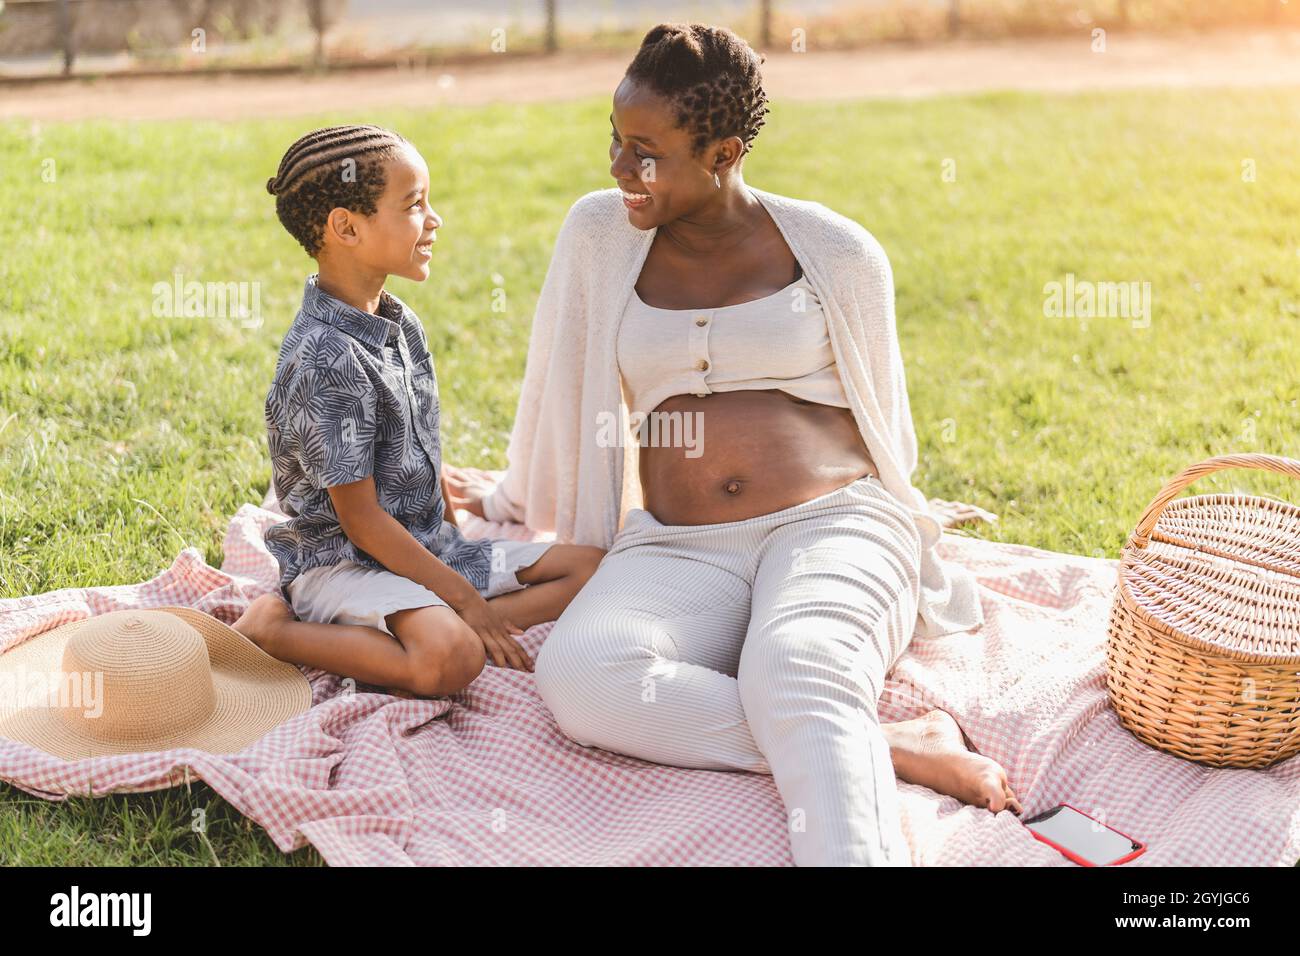 Happy playful Afro mother and son having fun in park doing a picnic together - Family love concept Stock Photo